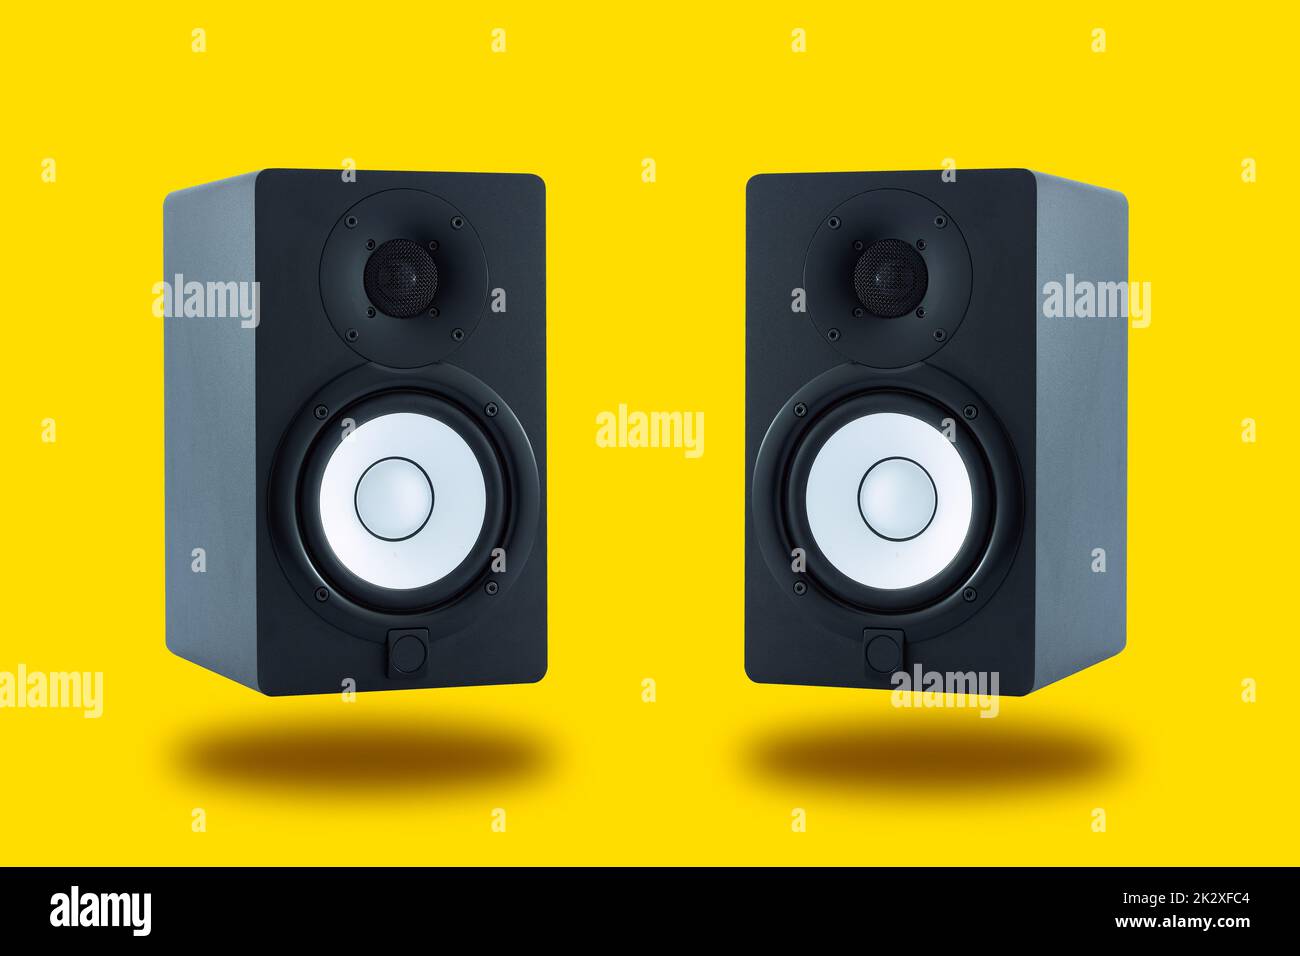 Pair of professional high quality monitor speakers for sound recording, mixing, and mastering in studio in black wooden casing isolated on yellow background. Front or Side view. Stock Photo